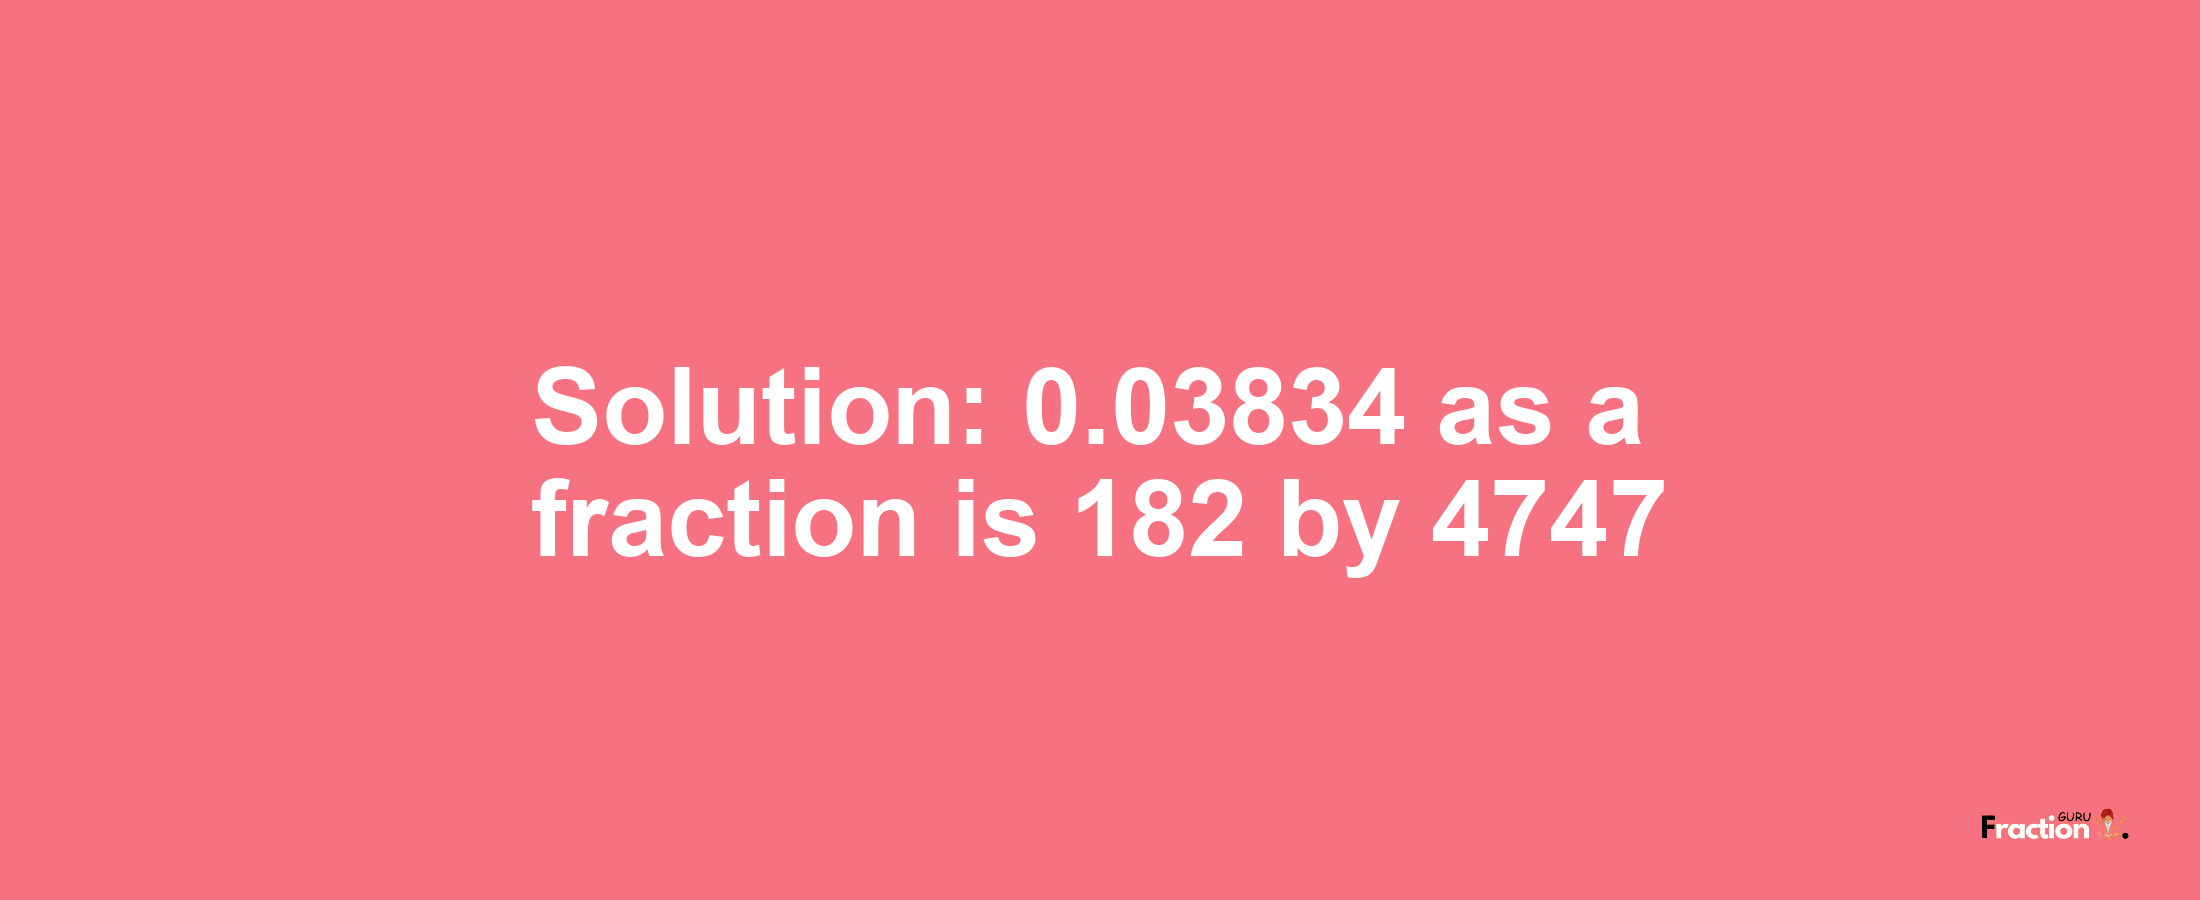 Solution:0.03834 as a fraction is 182/4747